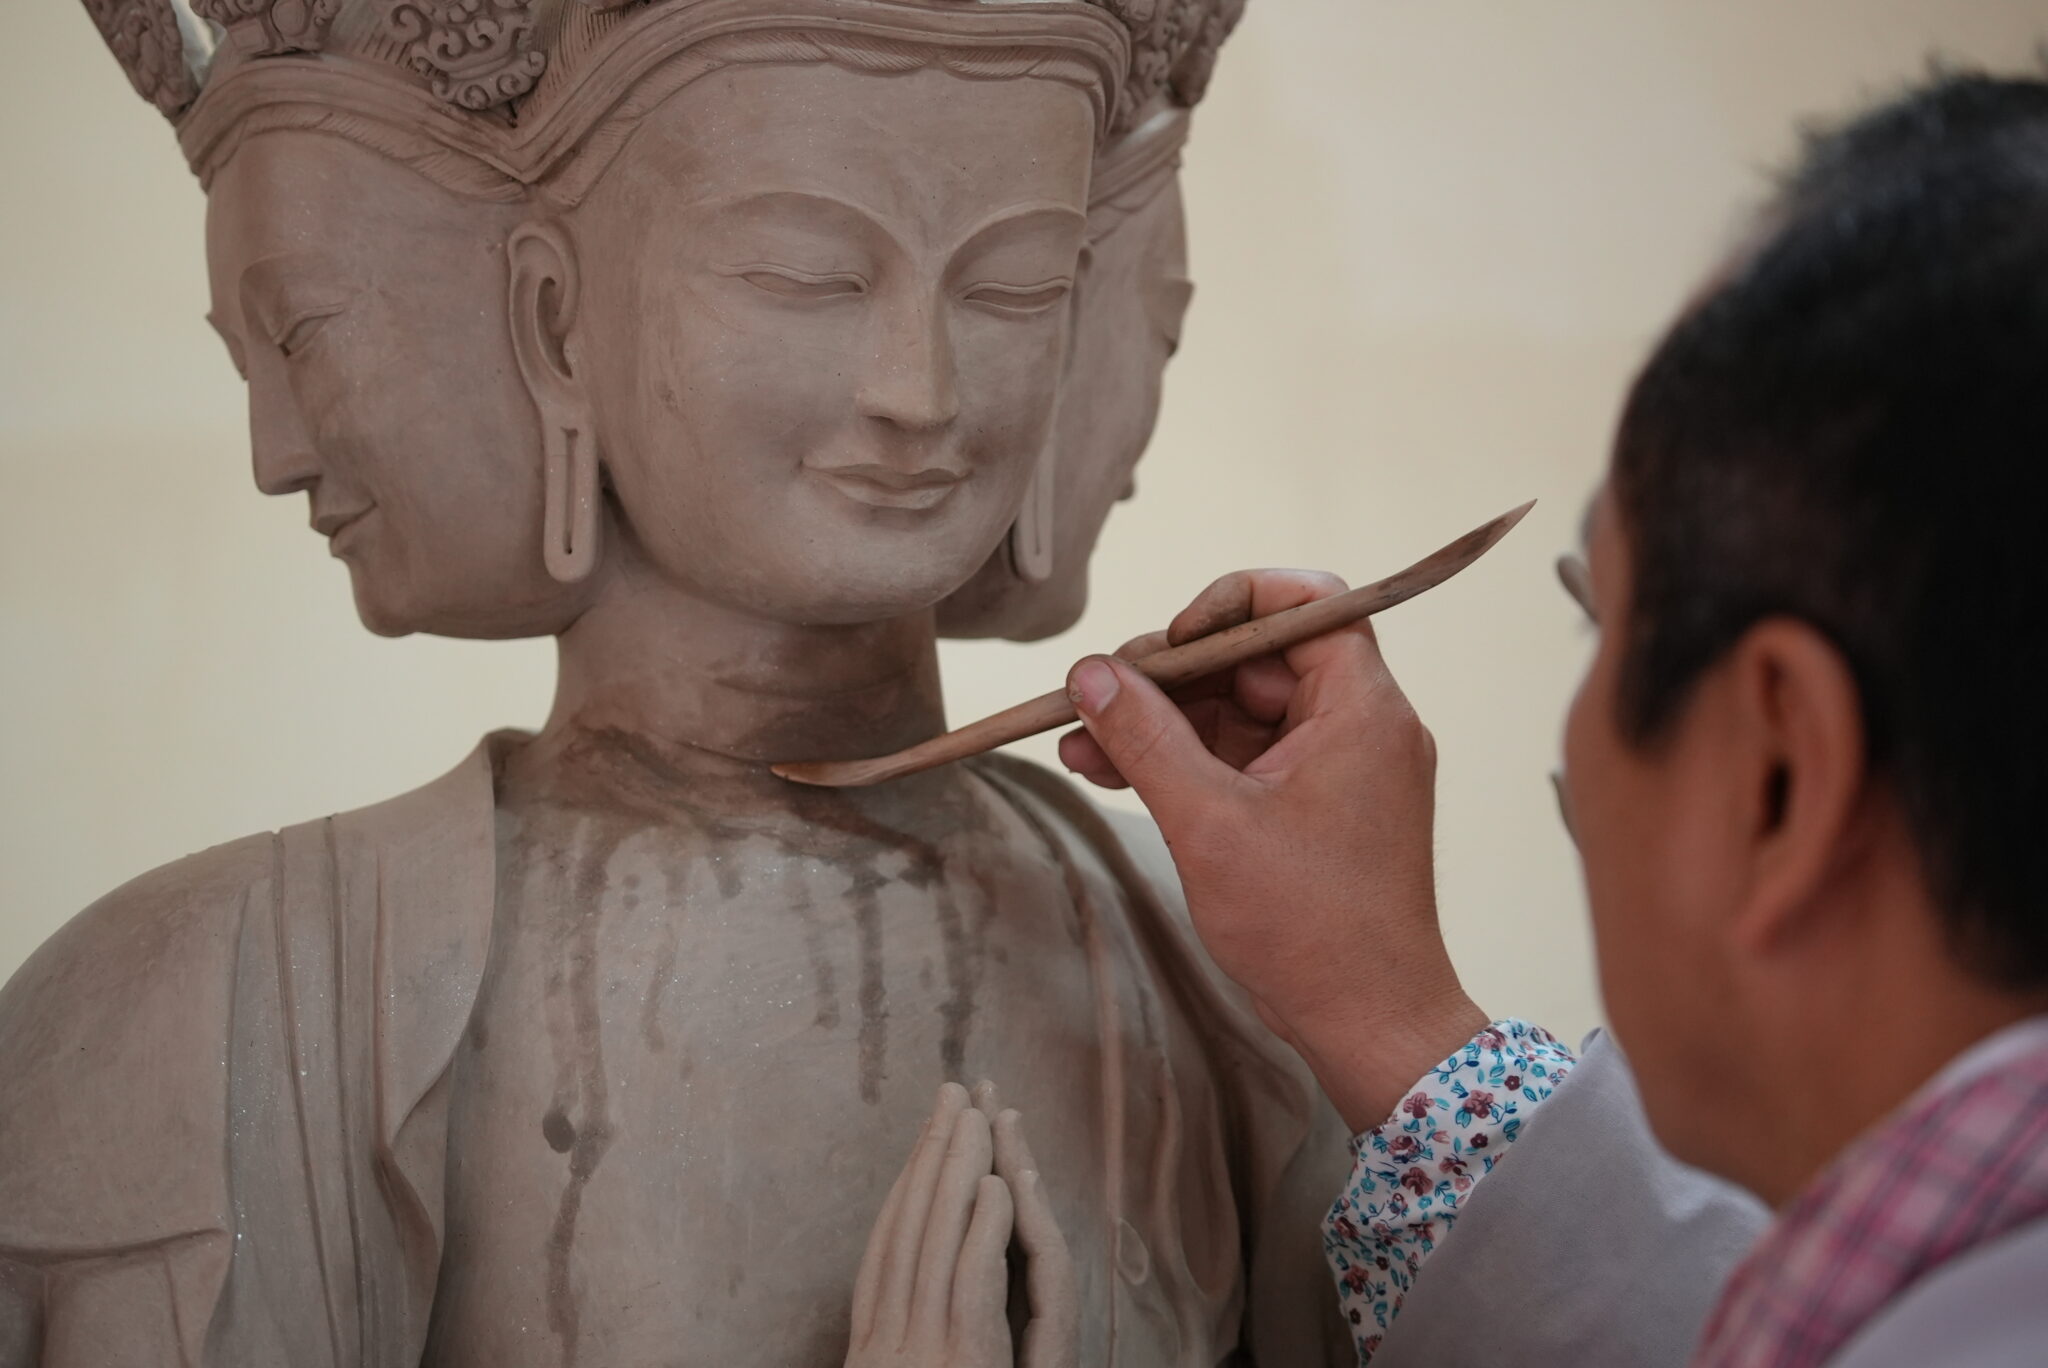 Sculptor works carefully with long, thin tool on unfinished sculpture of three-faced deity